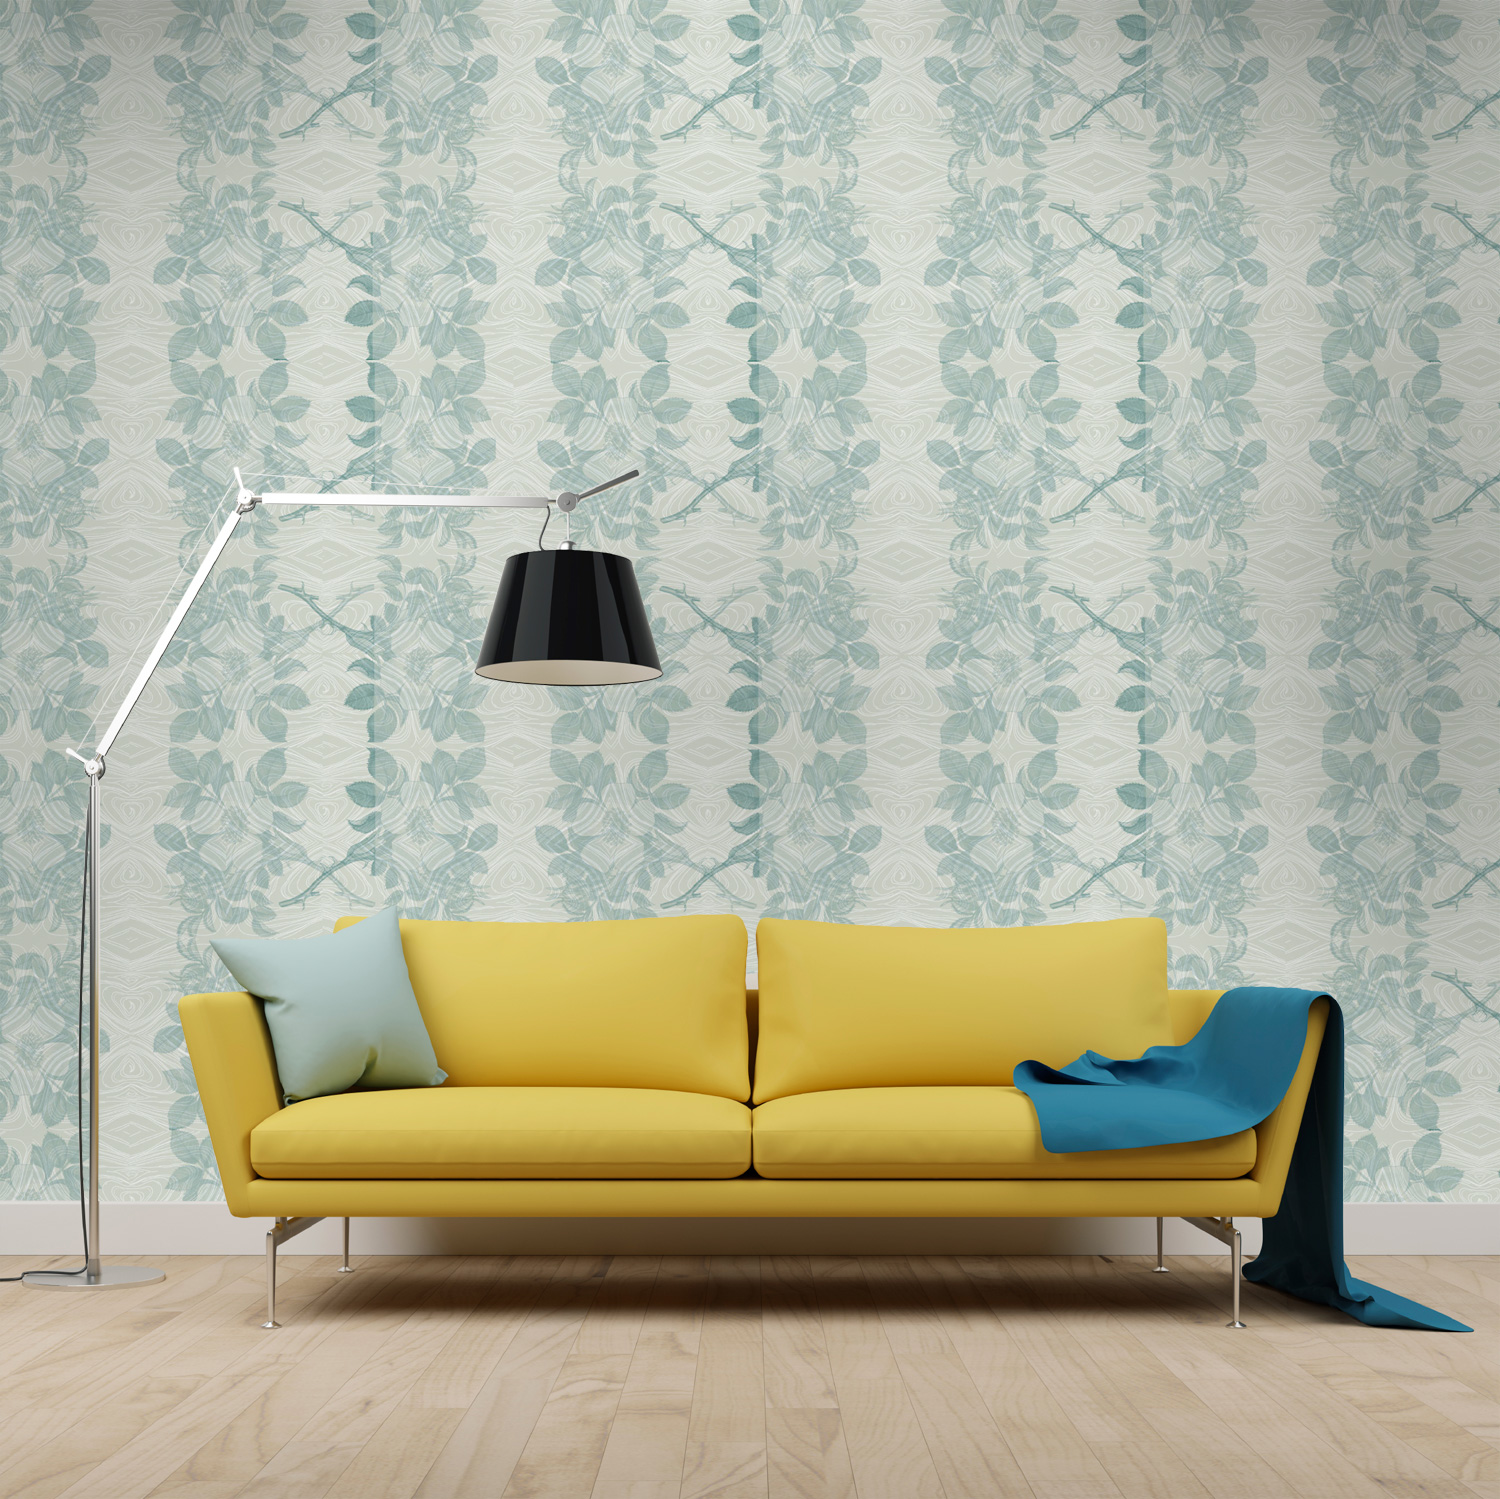 Yellow-Couch-Black-Lamp-FRANCIS-frost.jpg